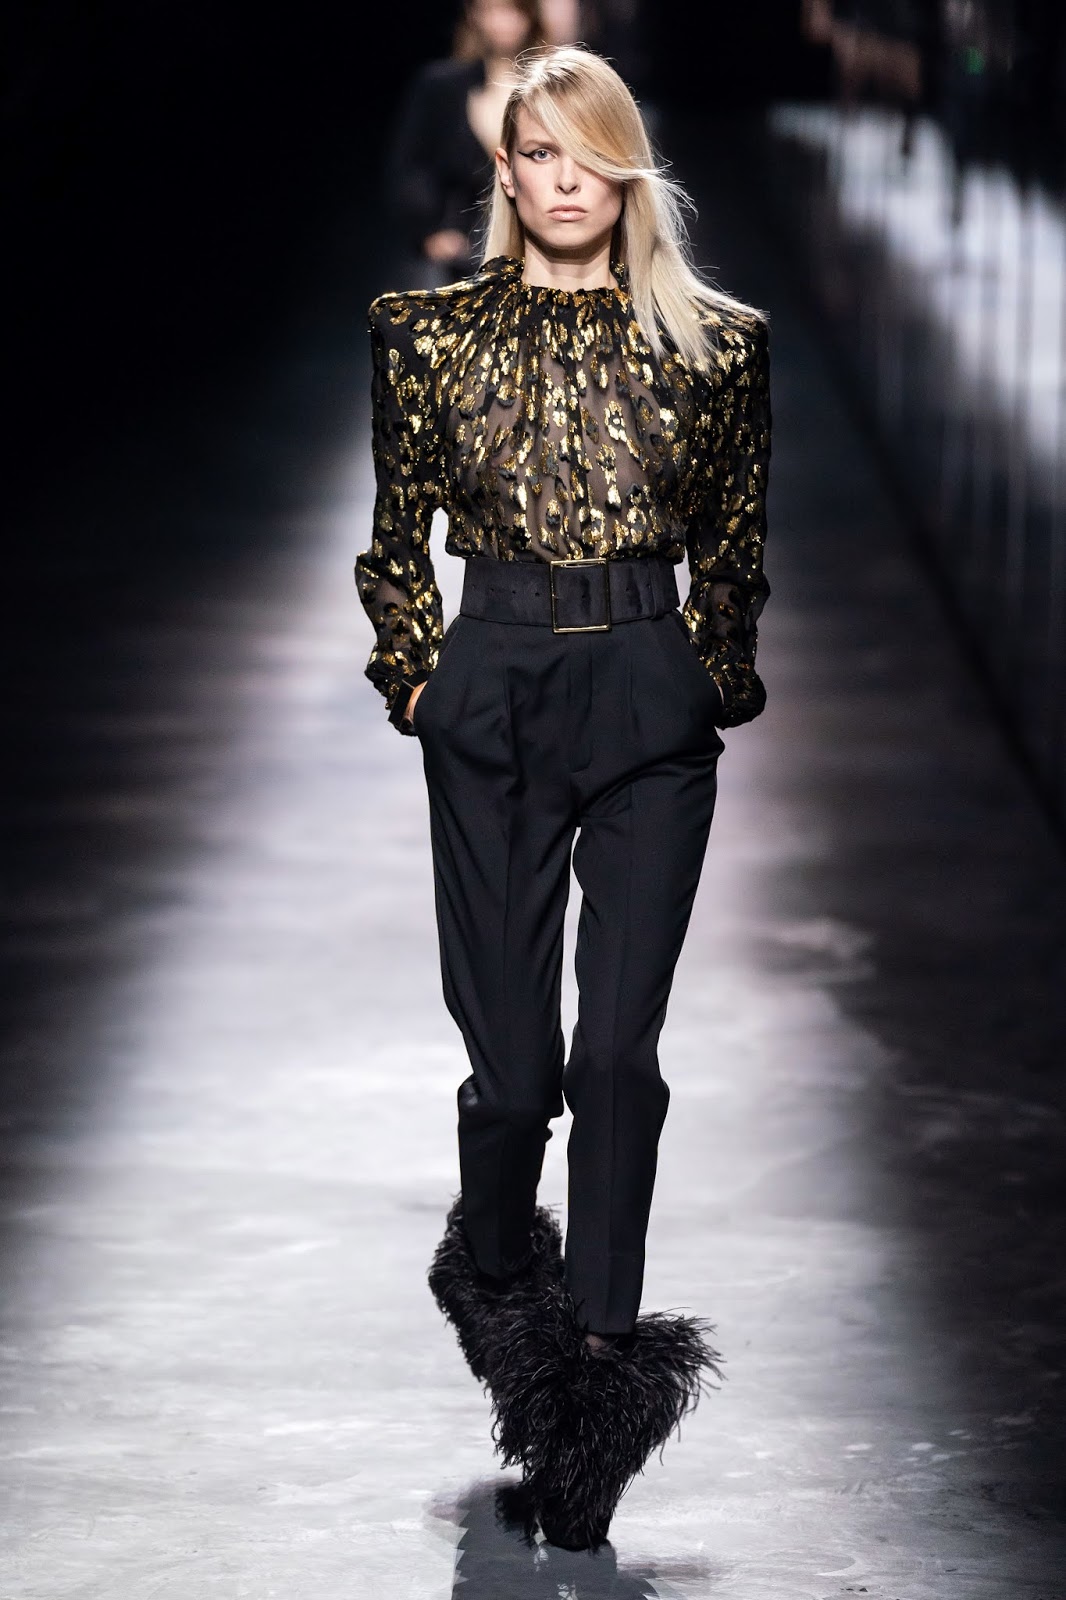 Spleen De Couture: THE EMANCIPATED STYLE GLAMAZONIANS BY SAINT LAURENT